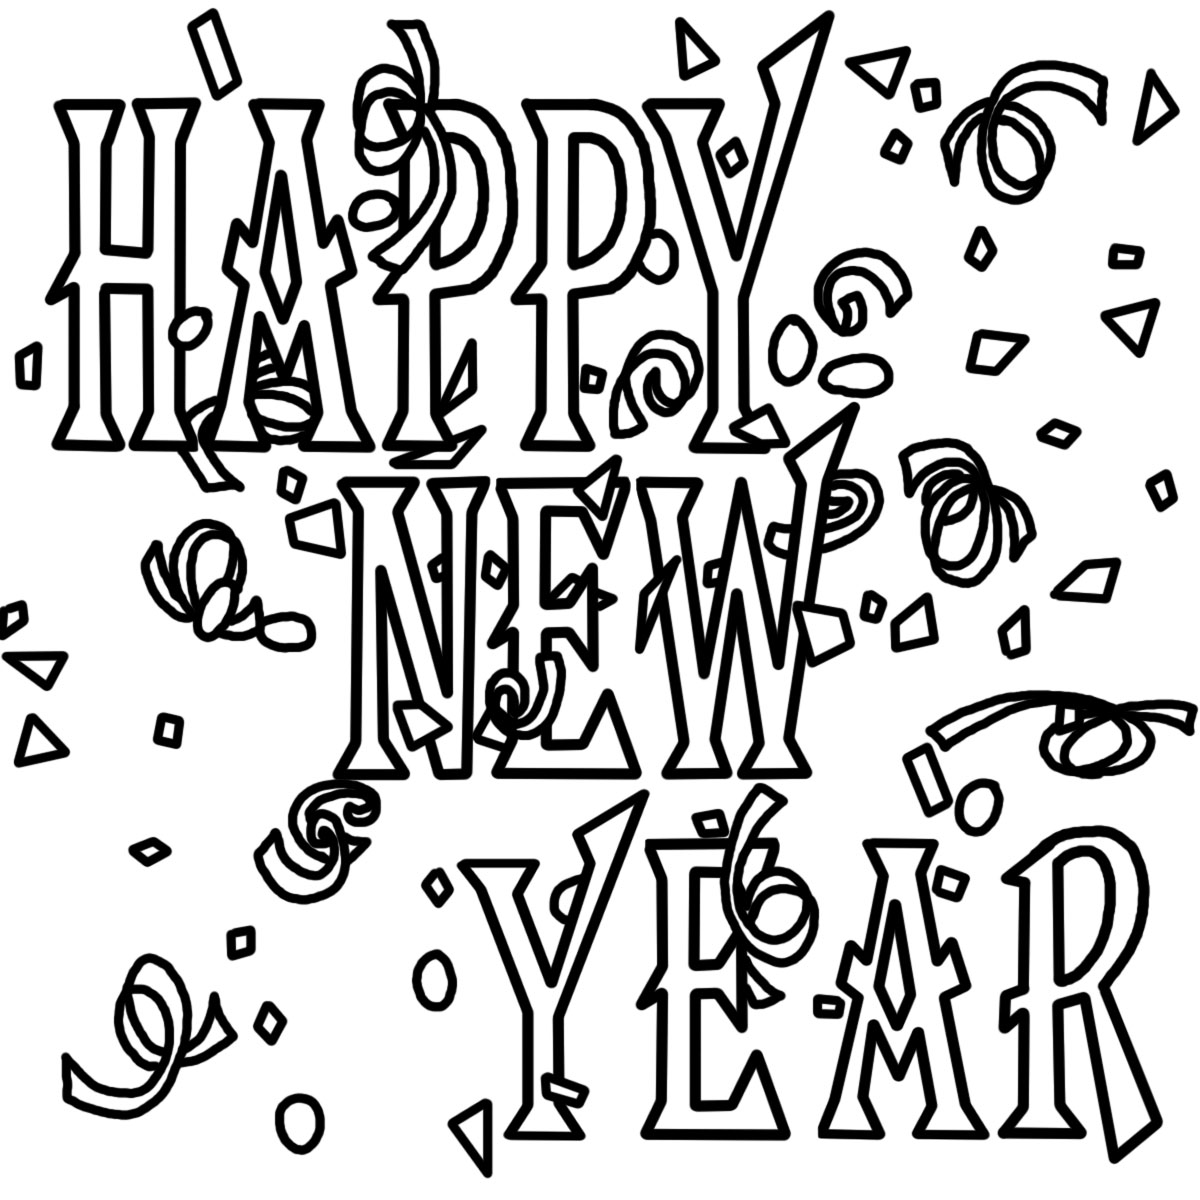 New Years Eve Clip Art Black And White Images  Pictures - Becuo